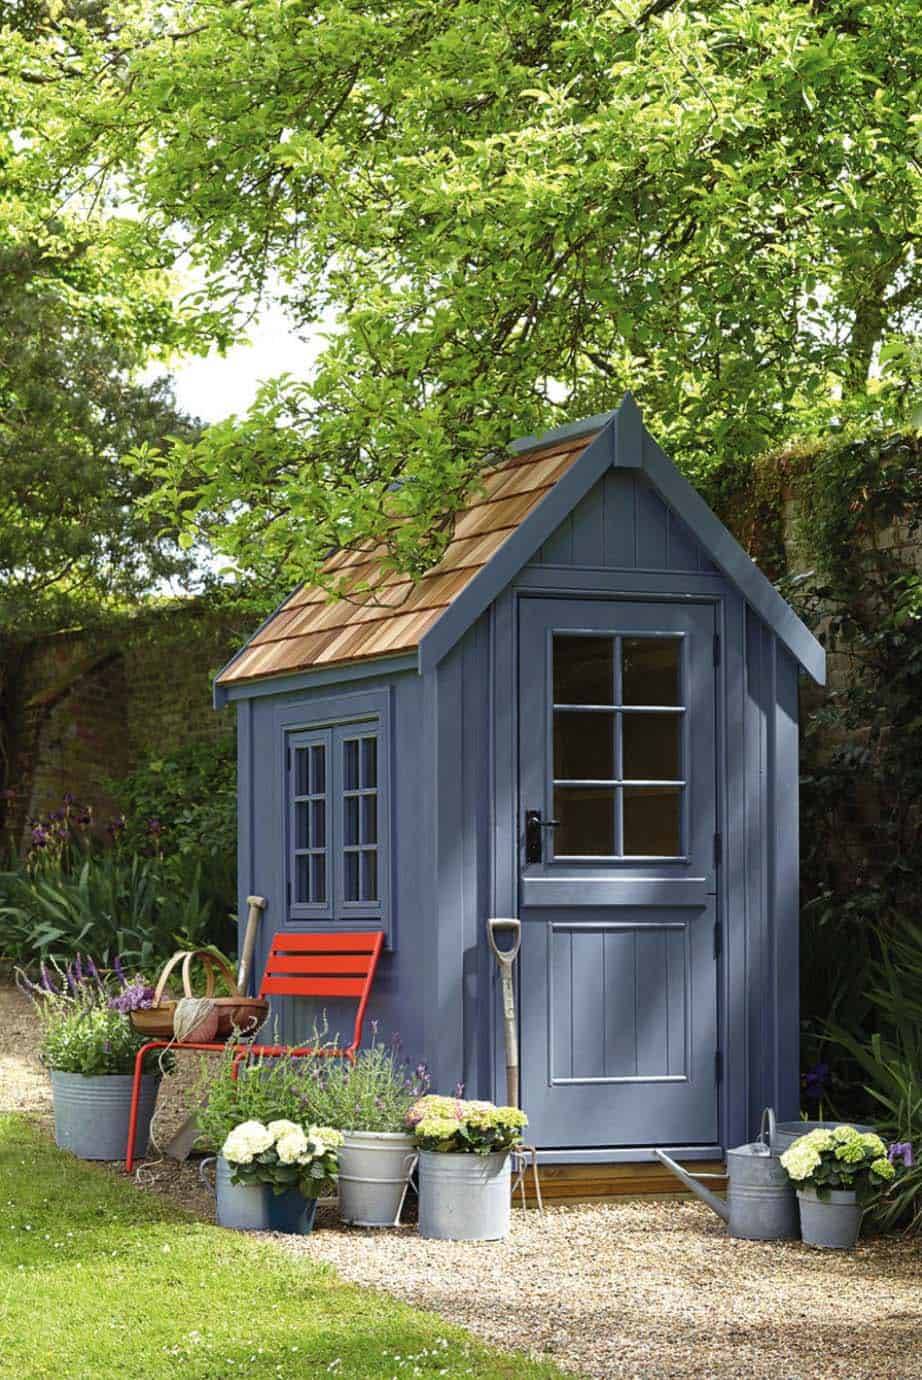 Shed Decor Rustic Gardens